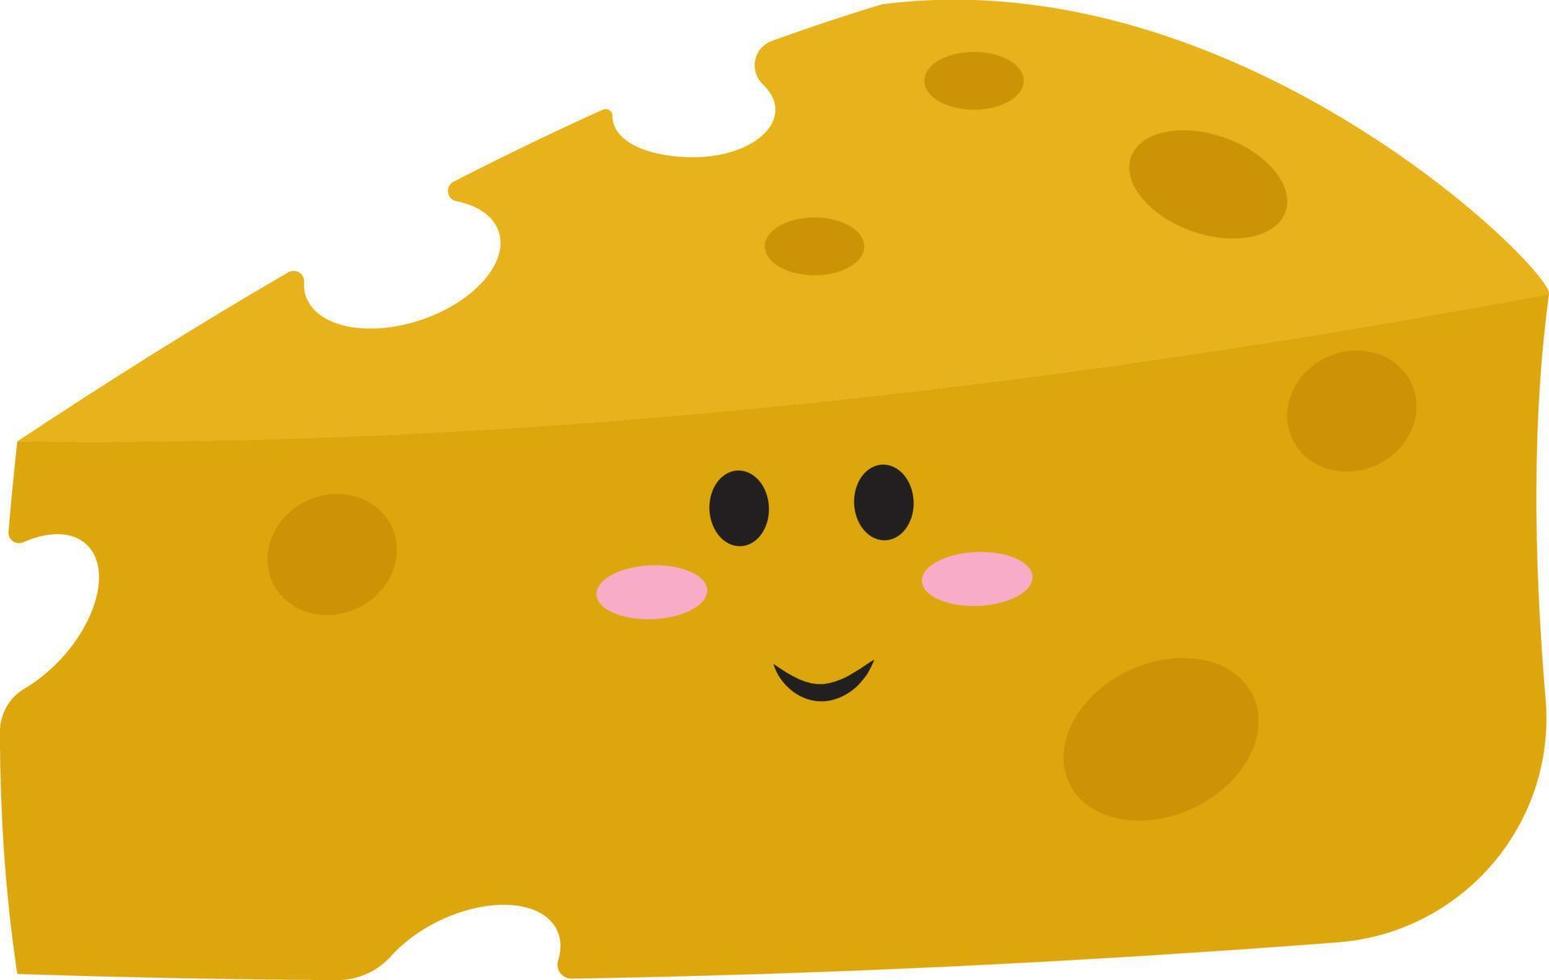 Cute cheese with eyes, illustration, vector on white background.